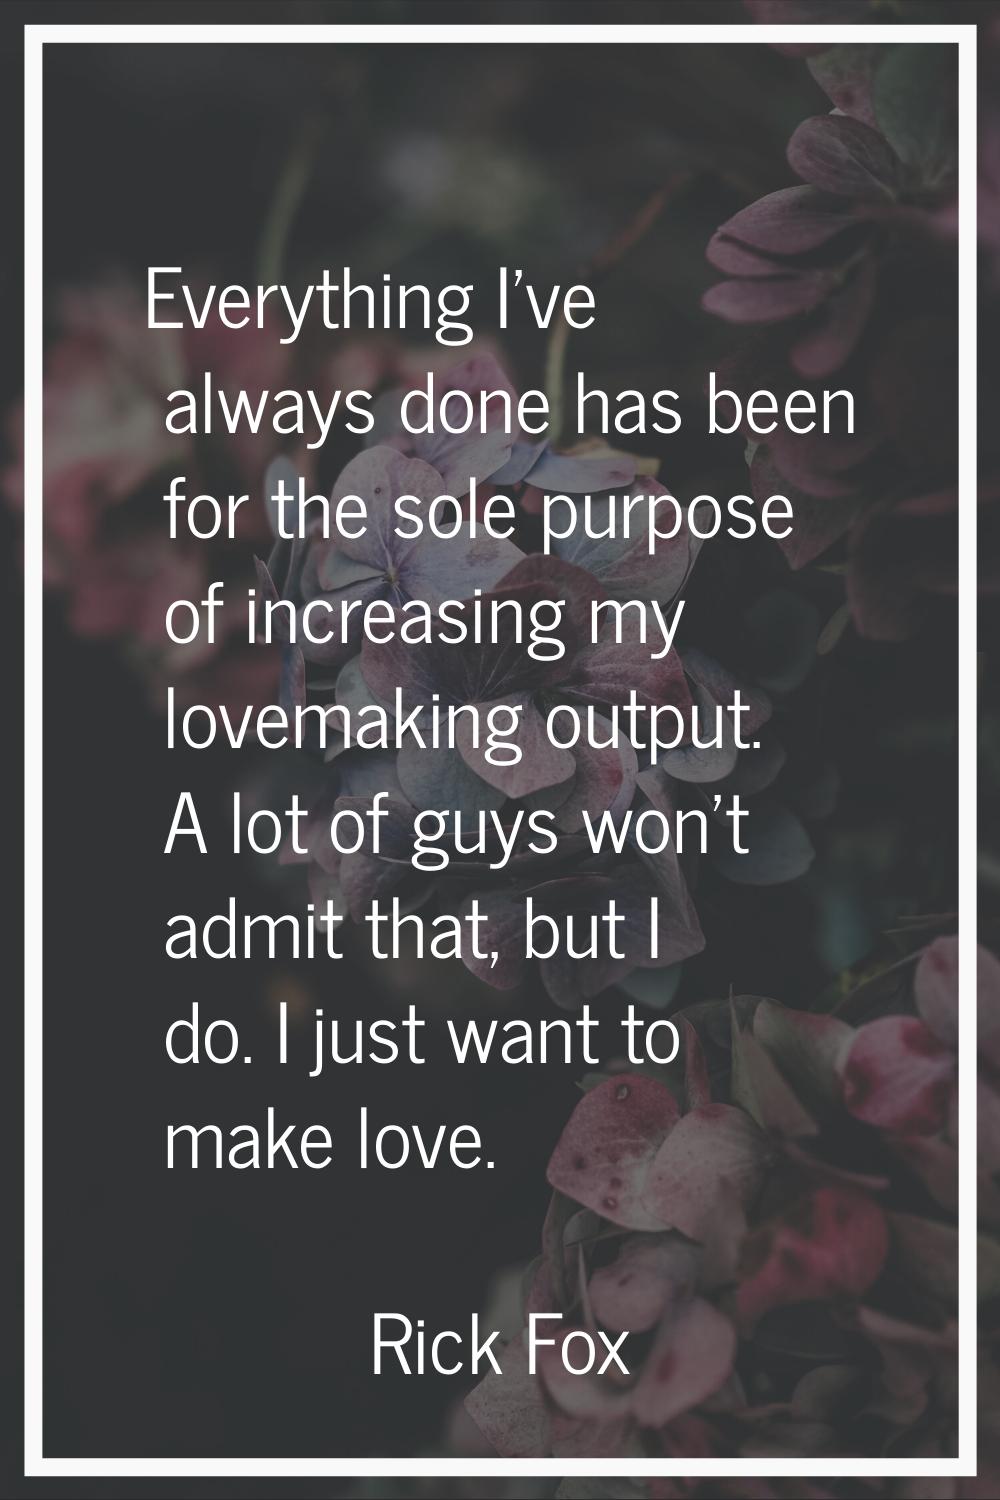 Everything I've always done has been for the sole purpose of increasing my lovemaking output. A lot